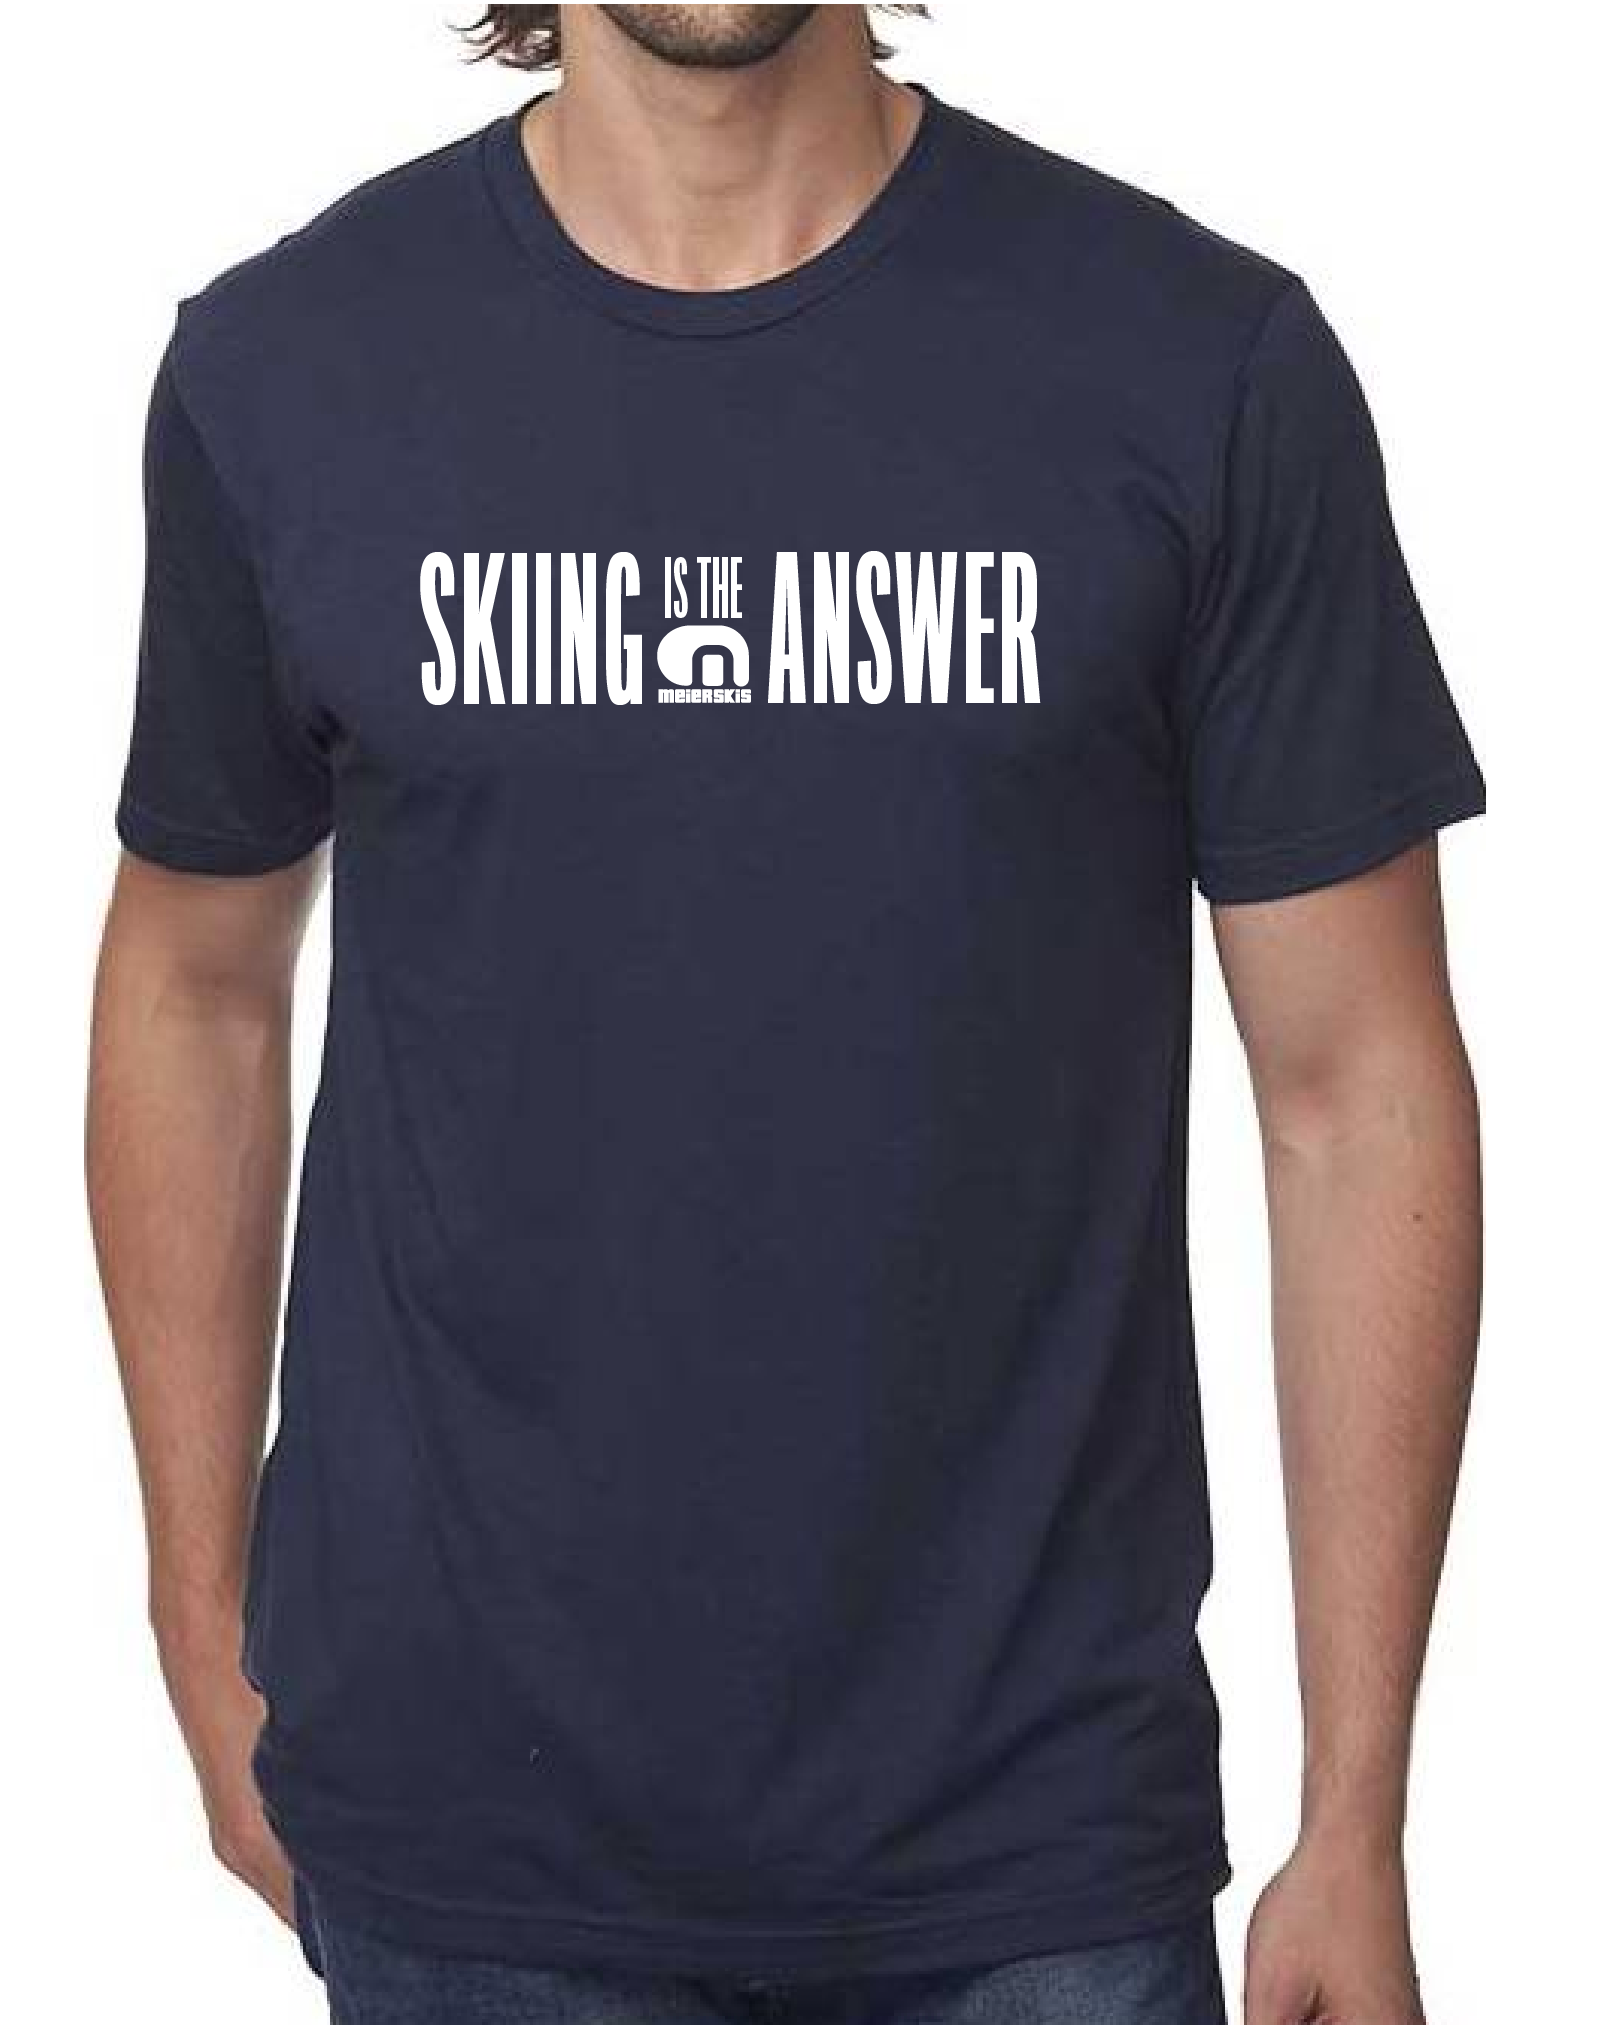 Skiing is the Answer unisex bamboo tee